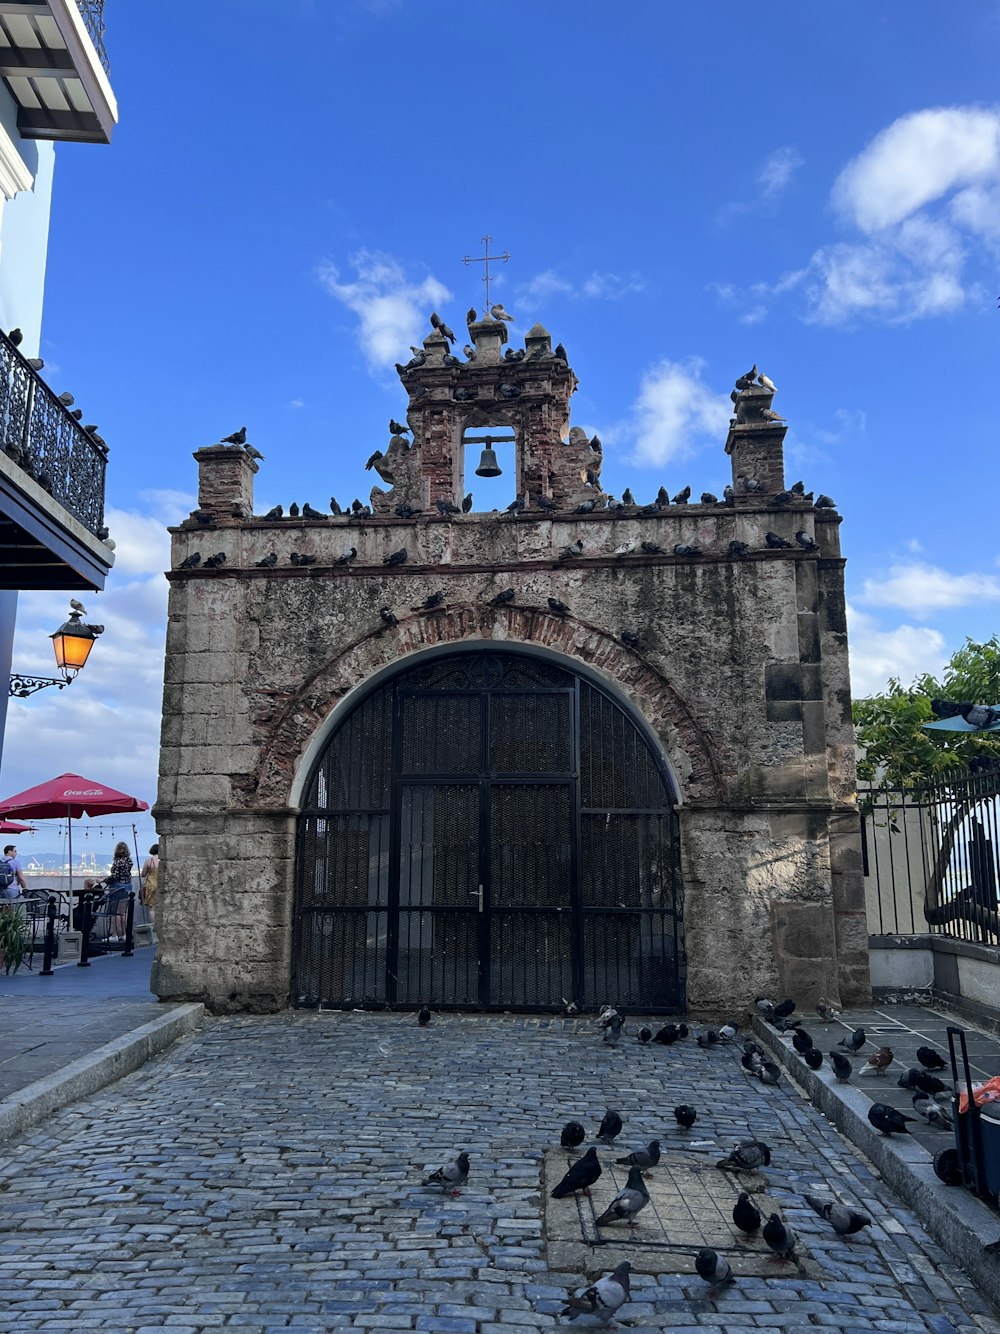 a stone building with a gate and a group of pigeons